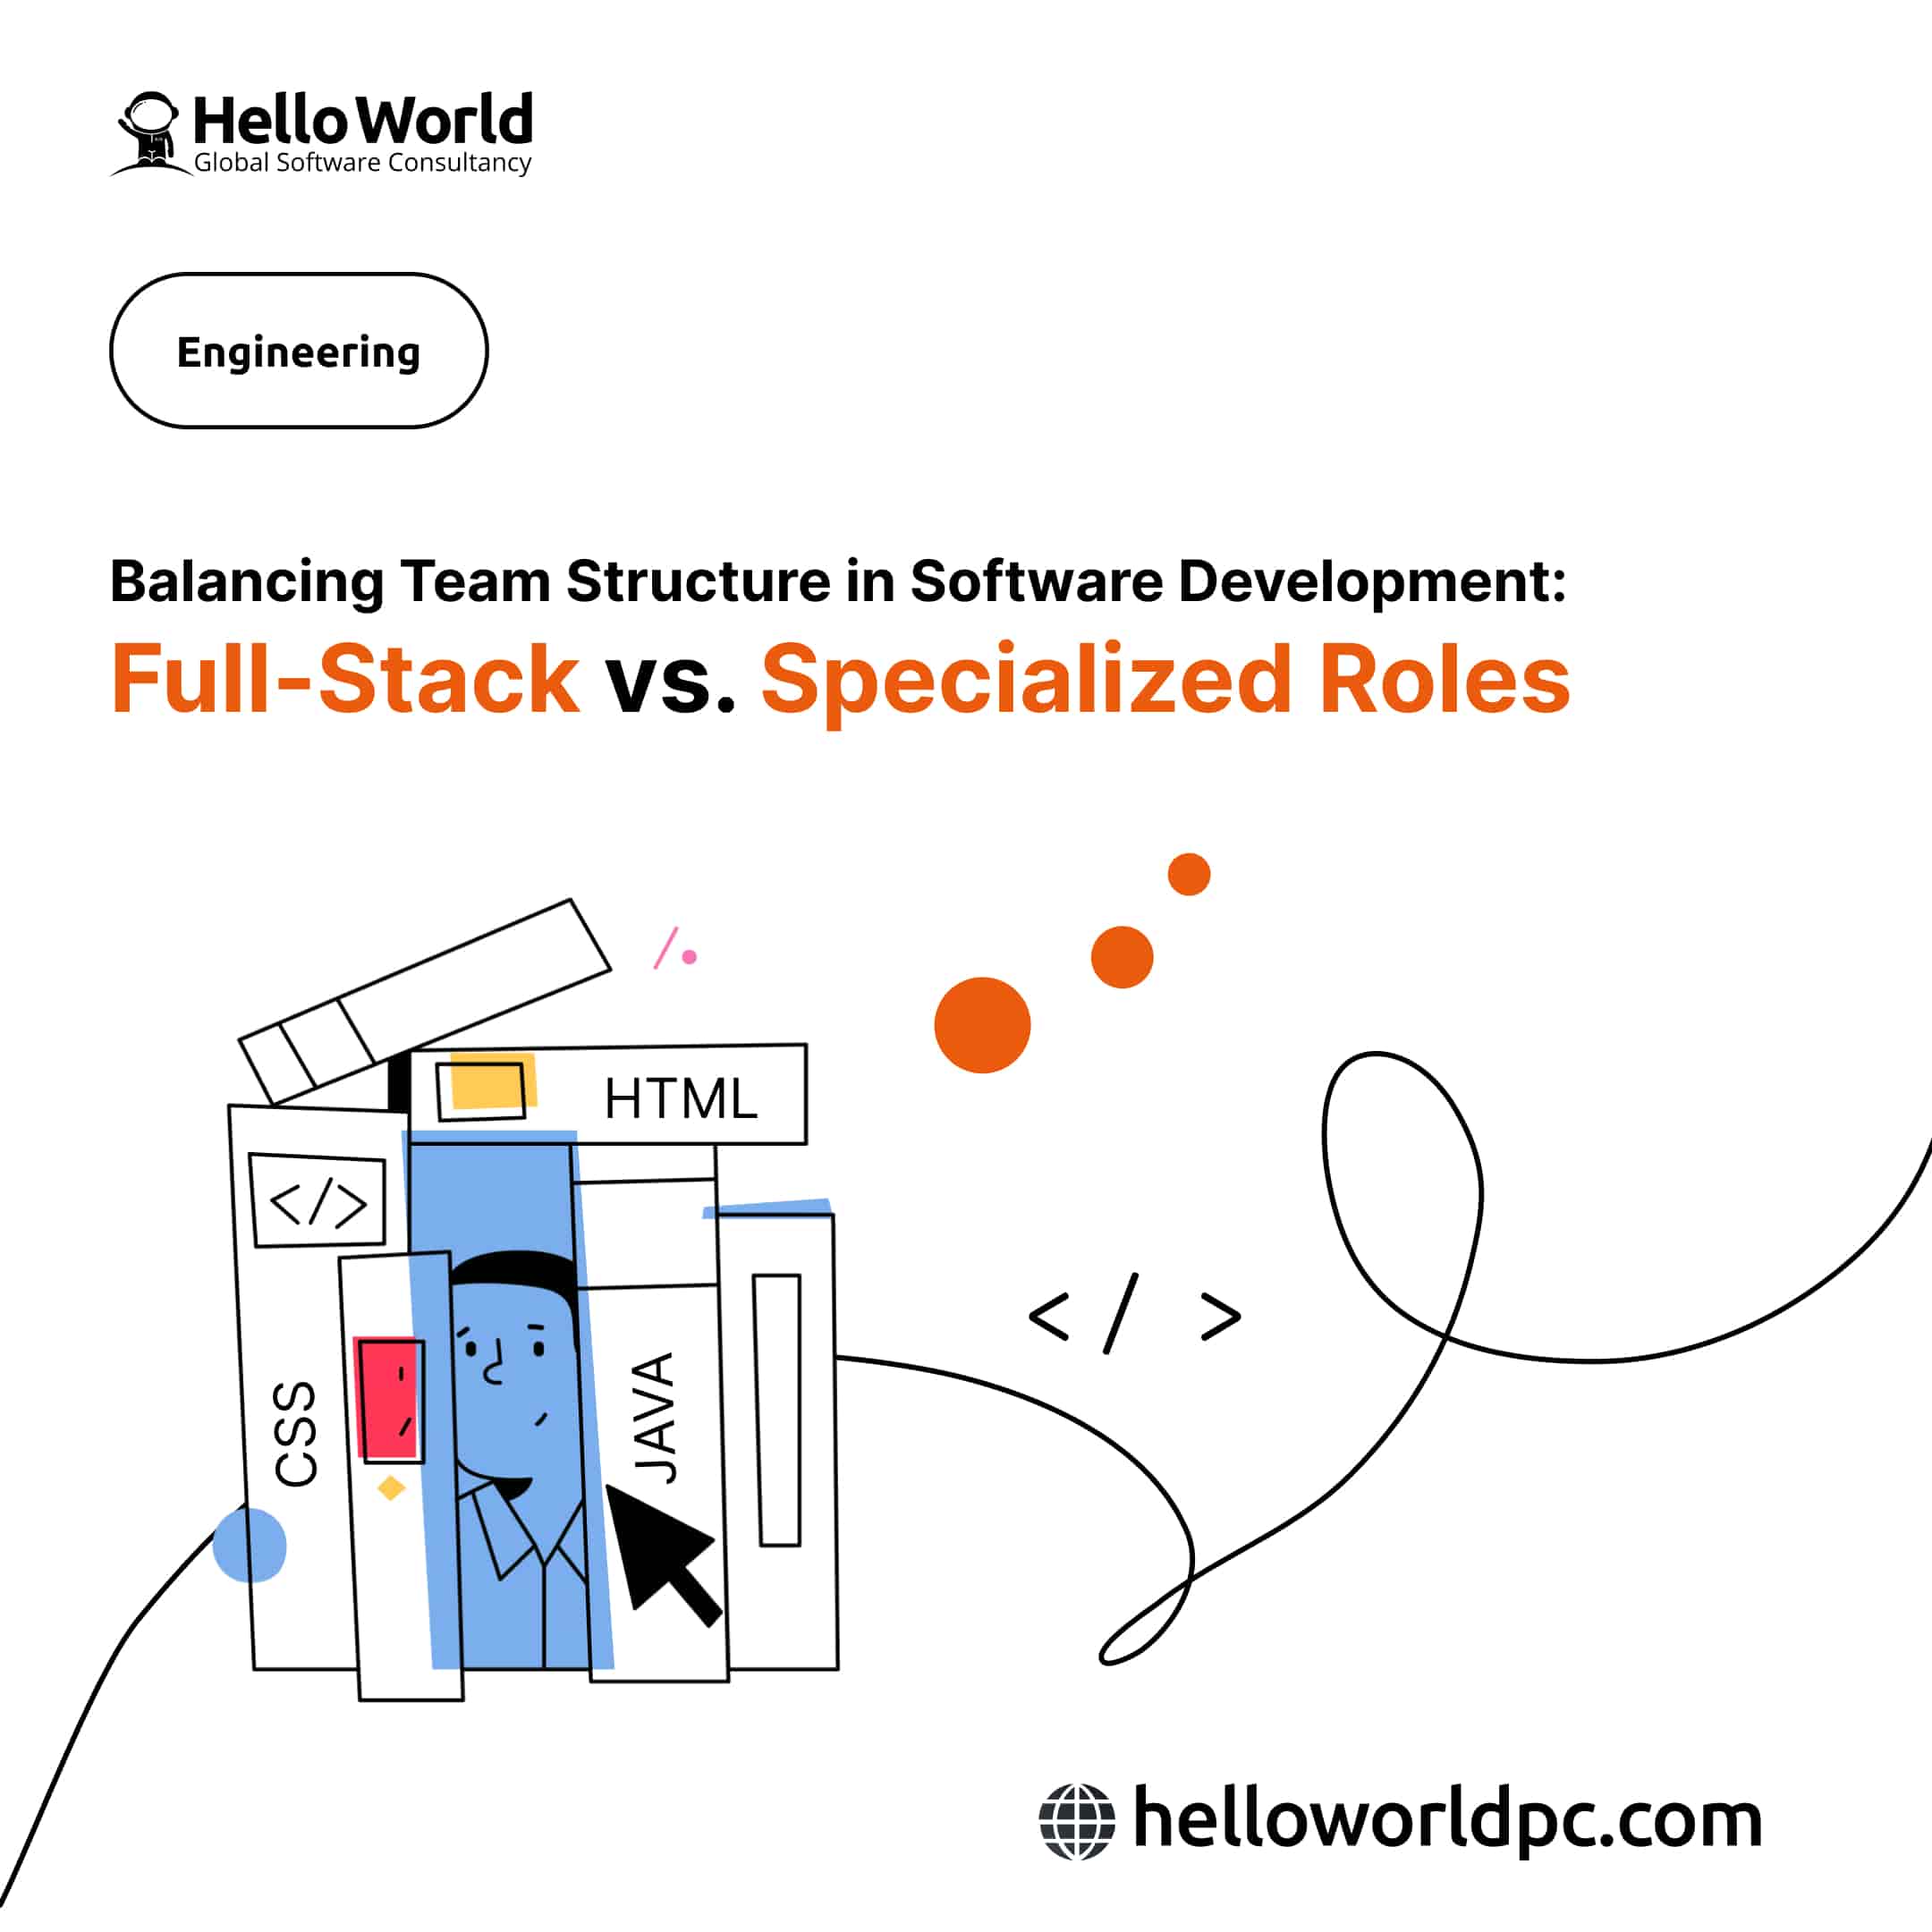 Balancing Team Structure in Software Development: Full-Stack vs. Specialized Roles